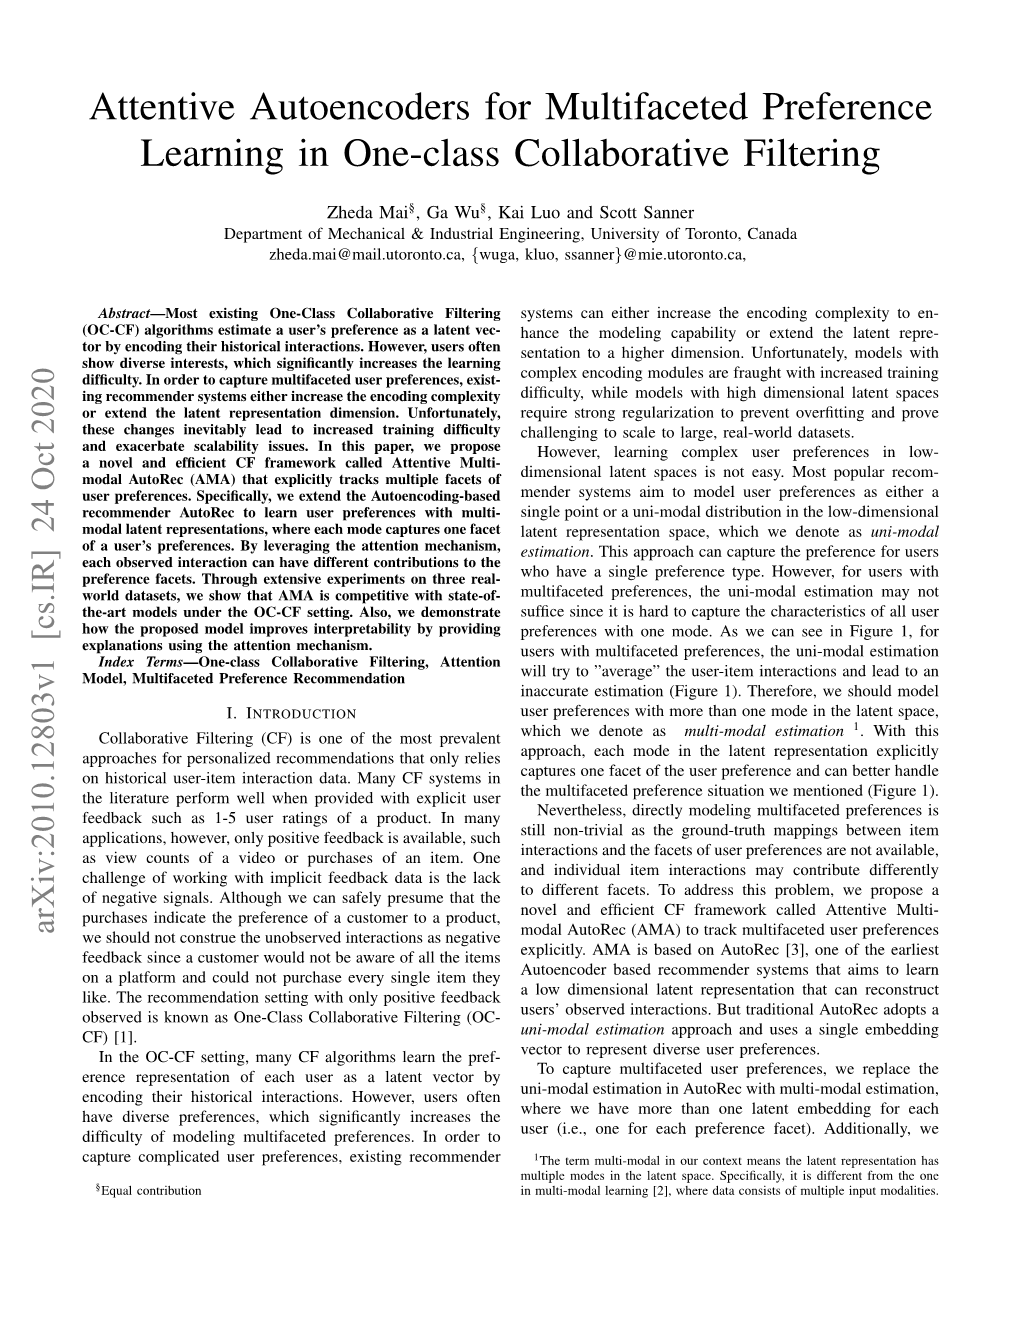 Attentive Autoencoders for Multifaceted Preference Learning in One-Class Collaborative Filtering